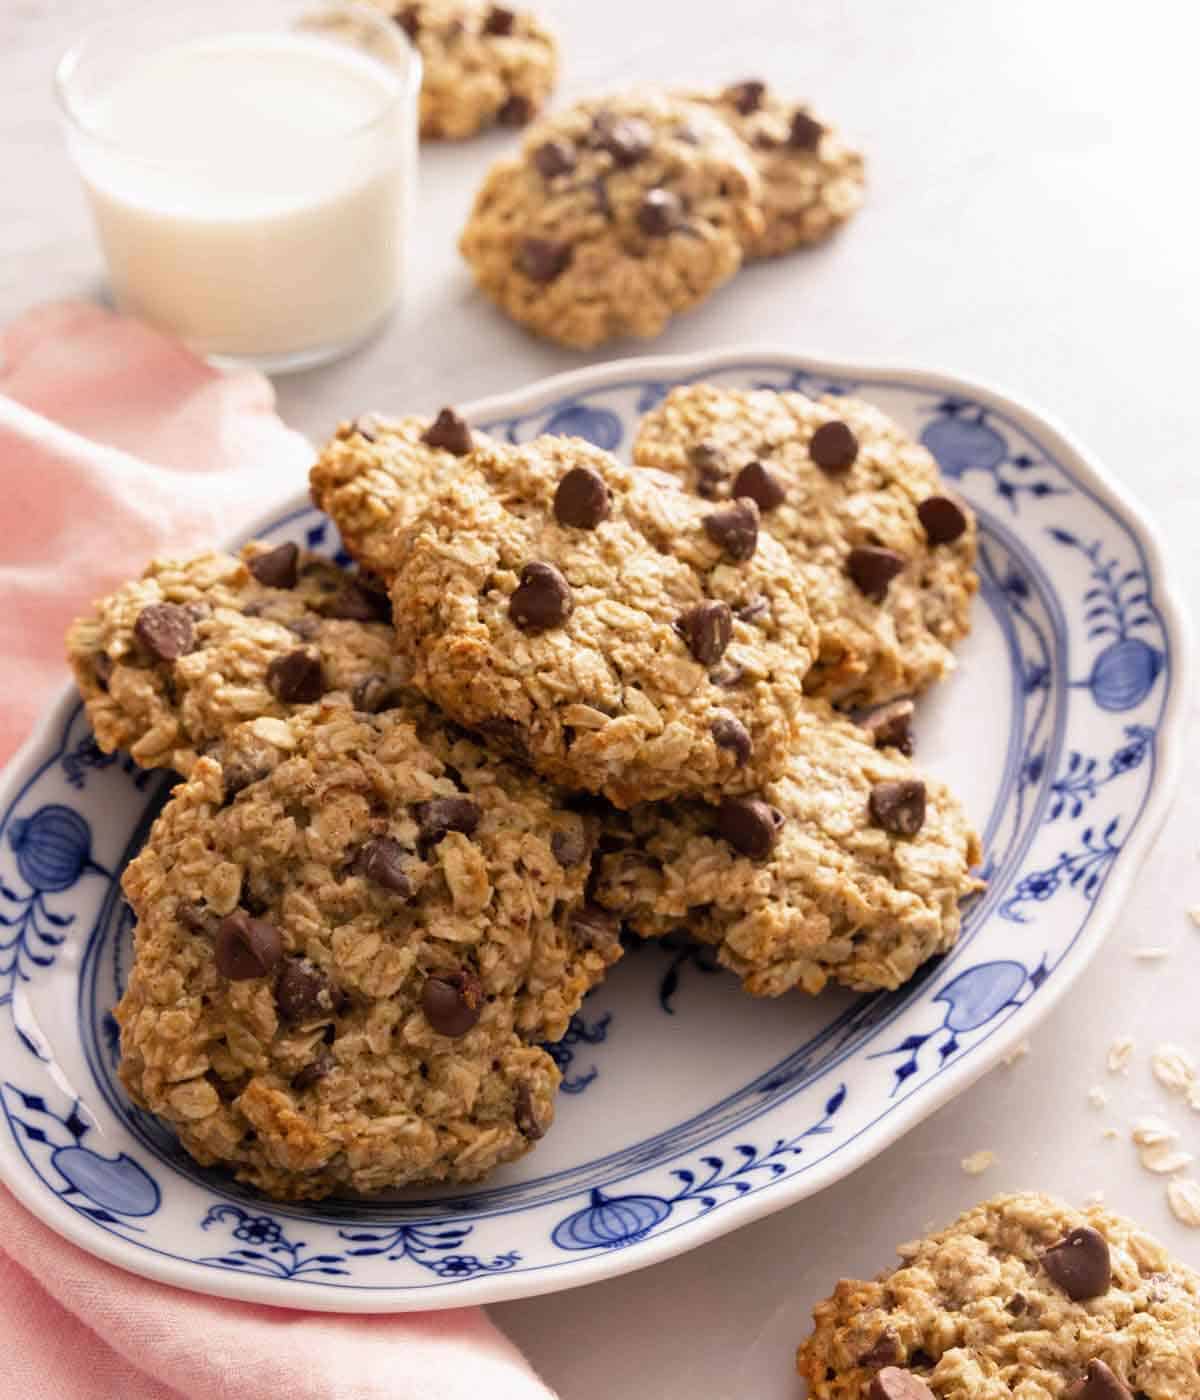 A platter of banana oatmeal cookies by a cup of milk.